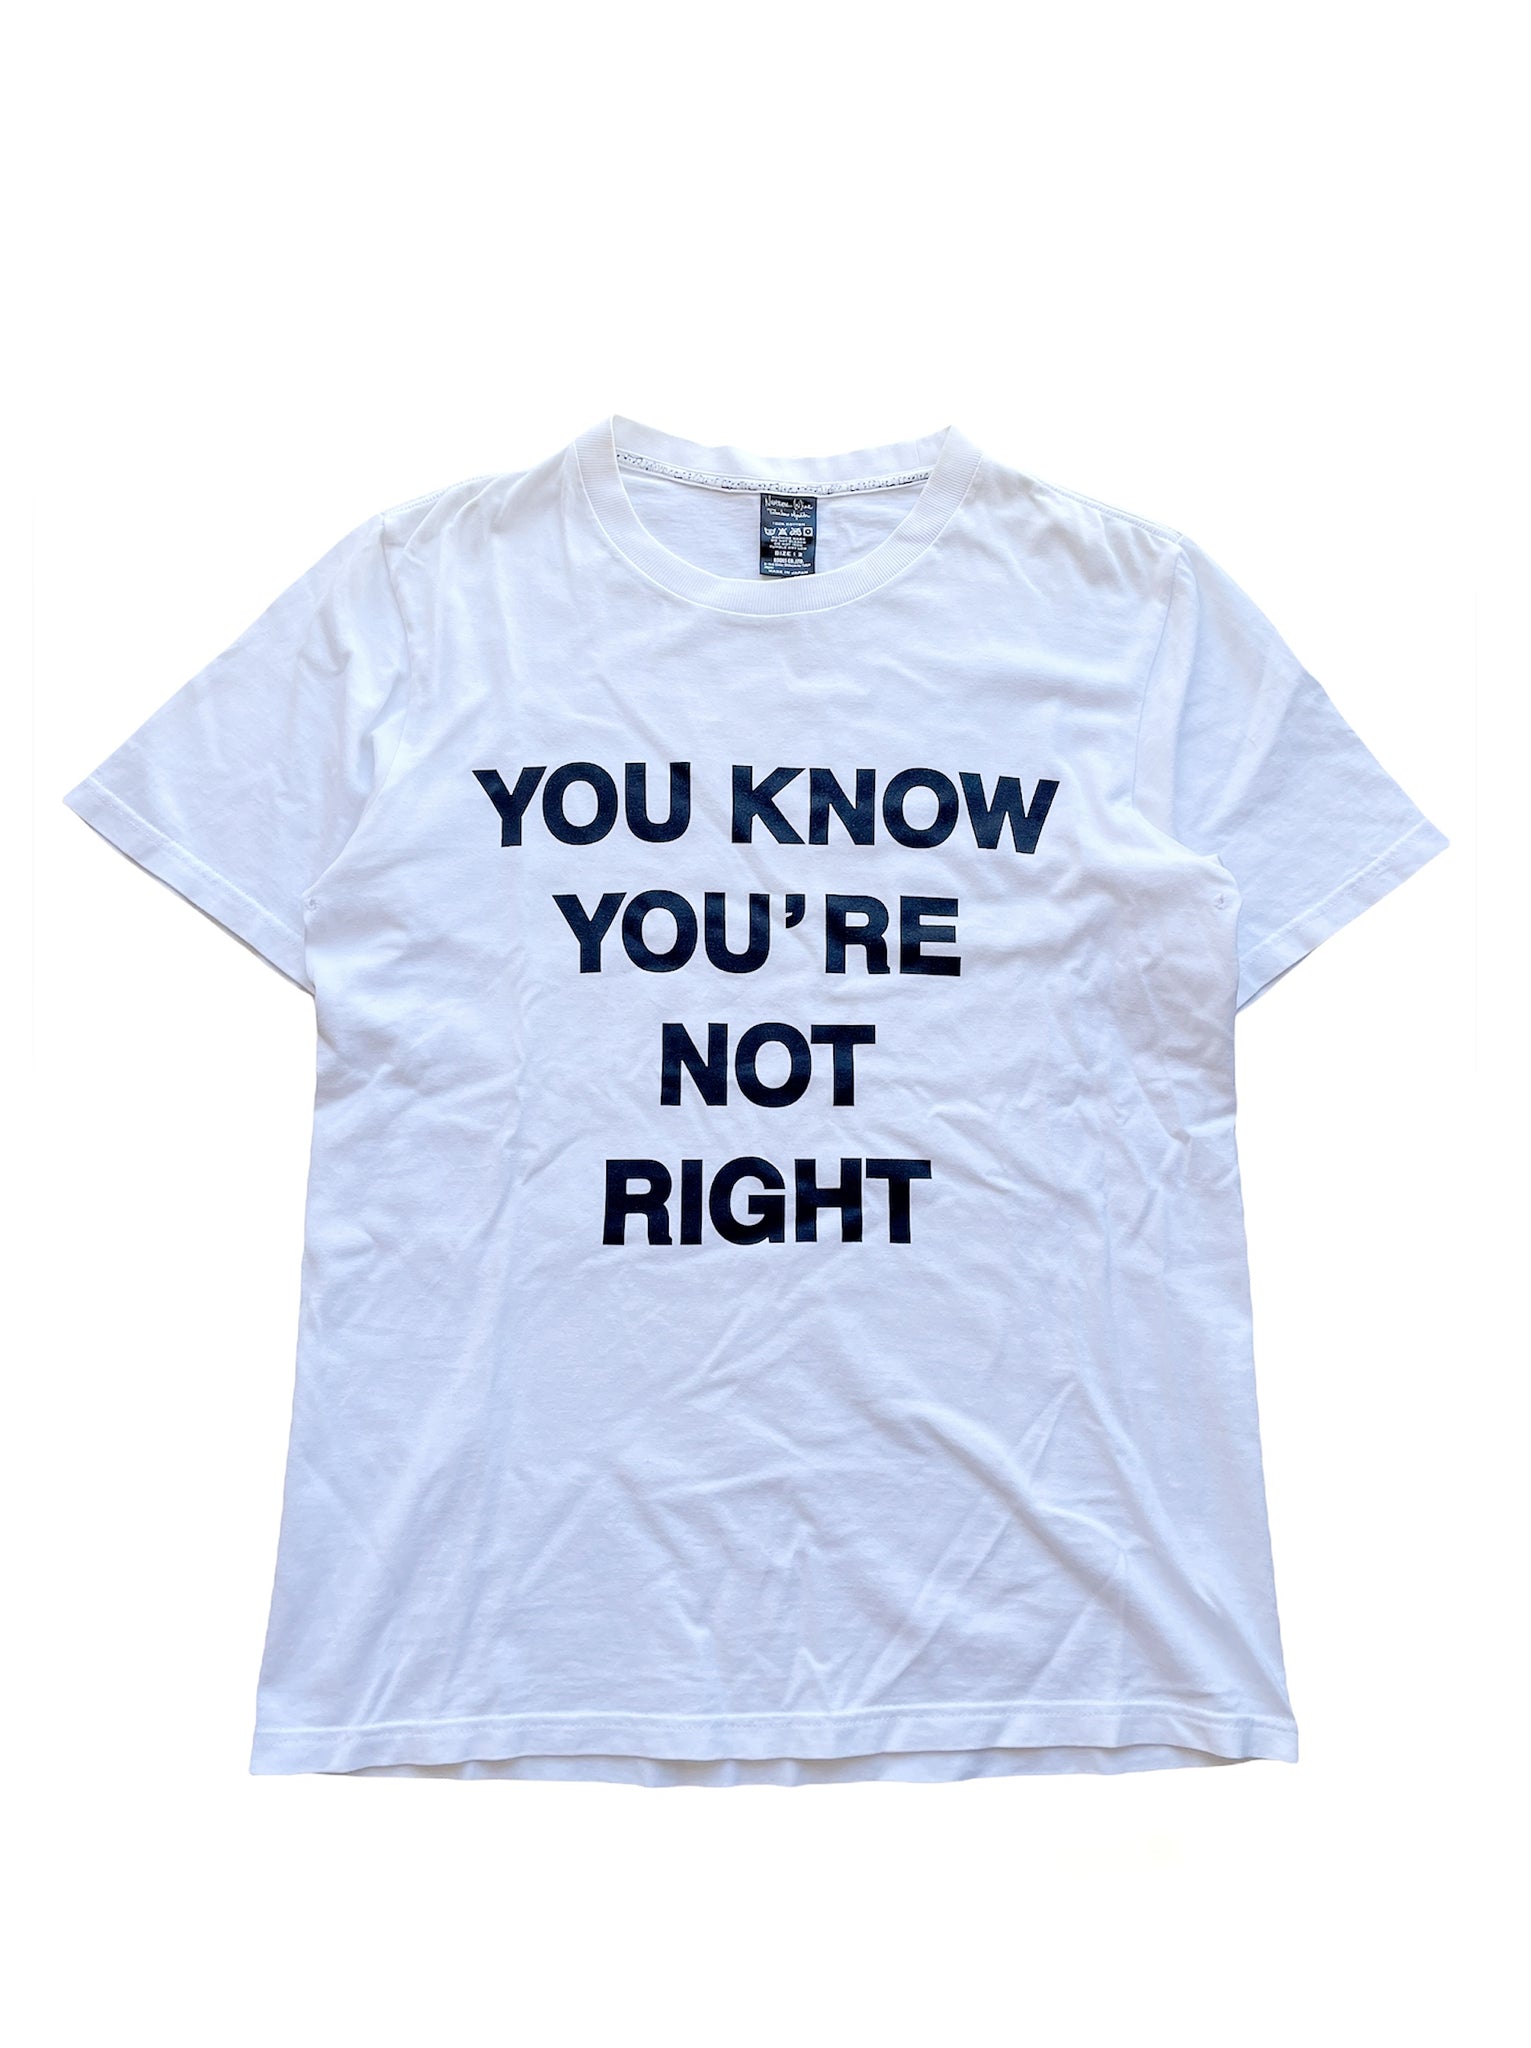 SS03 You Know You’re Not Right Tee